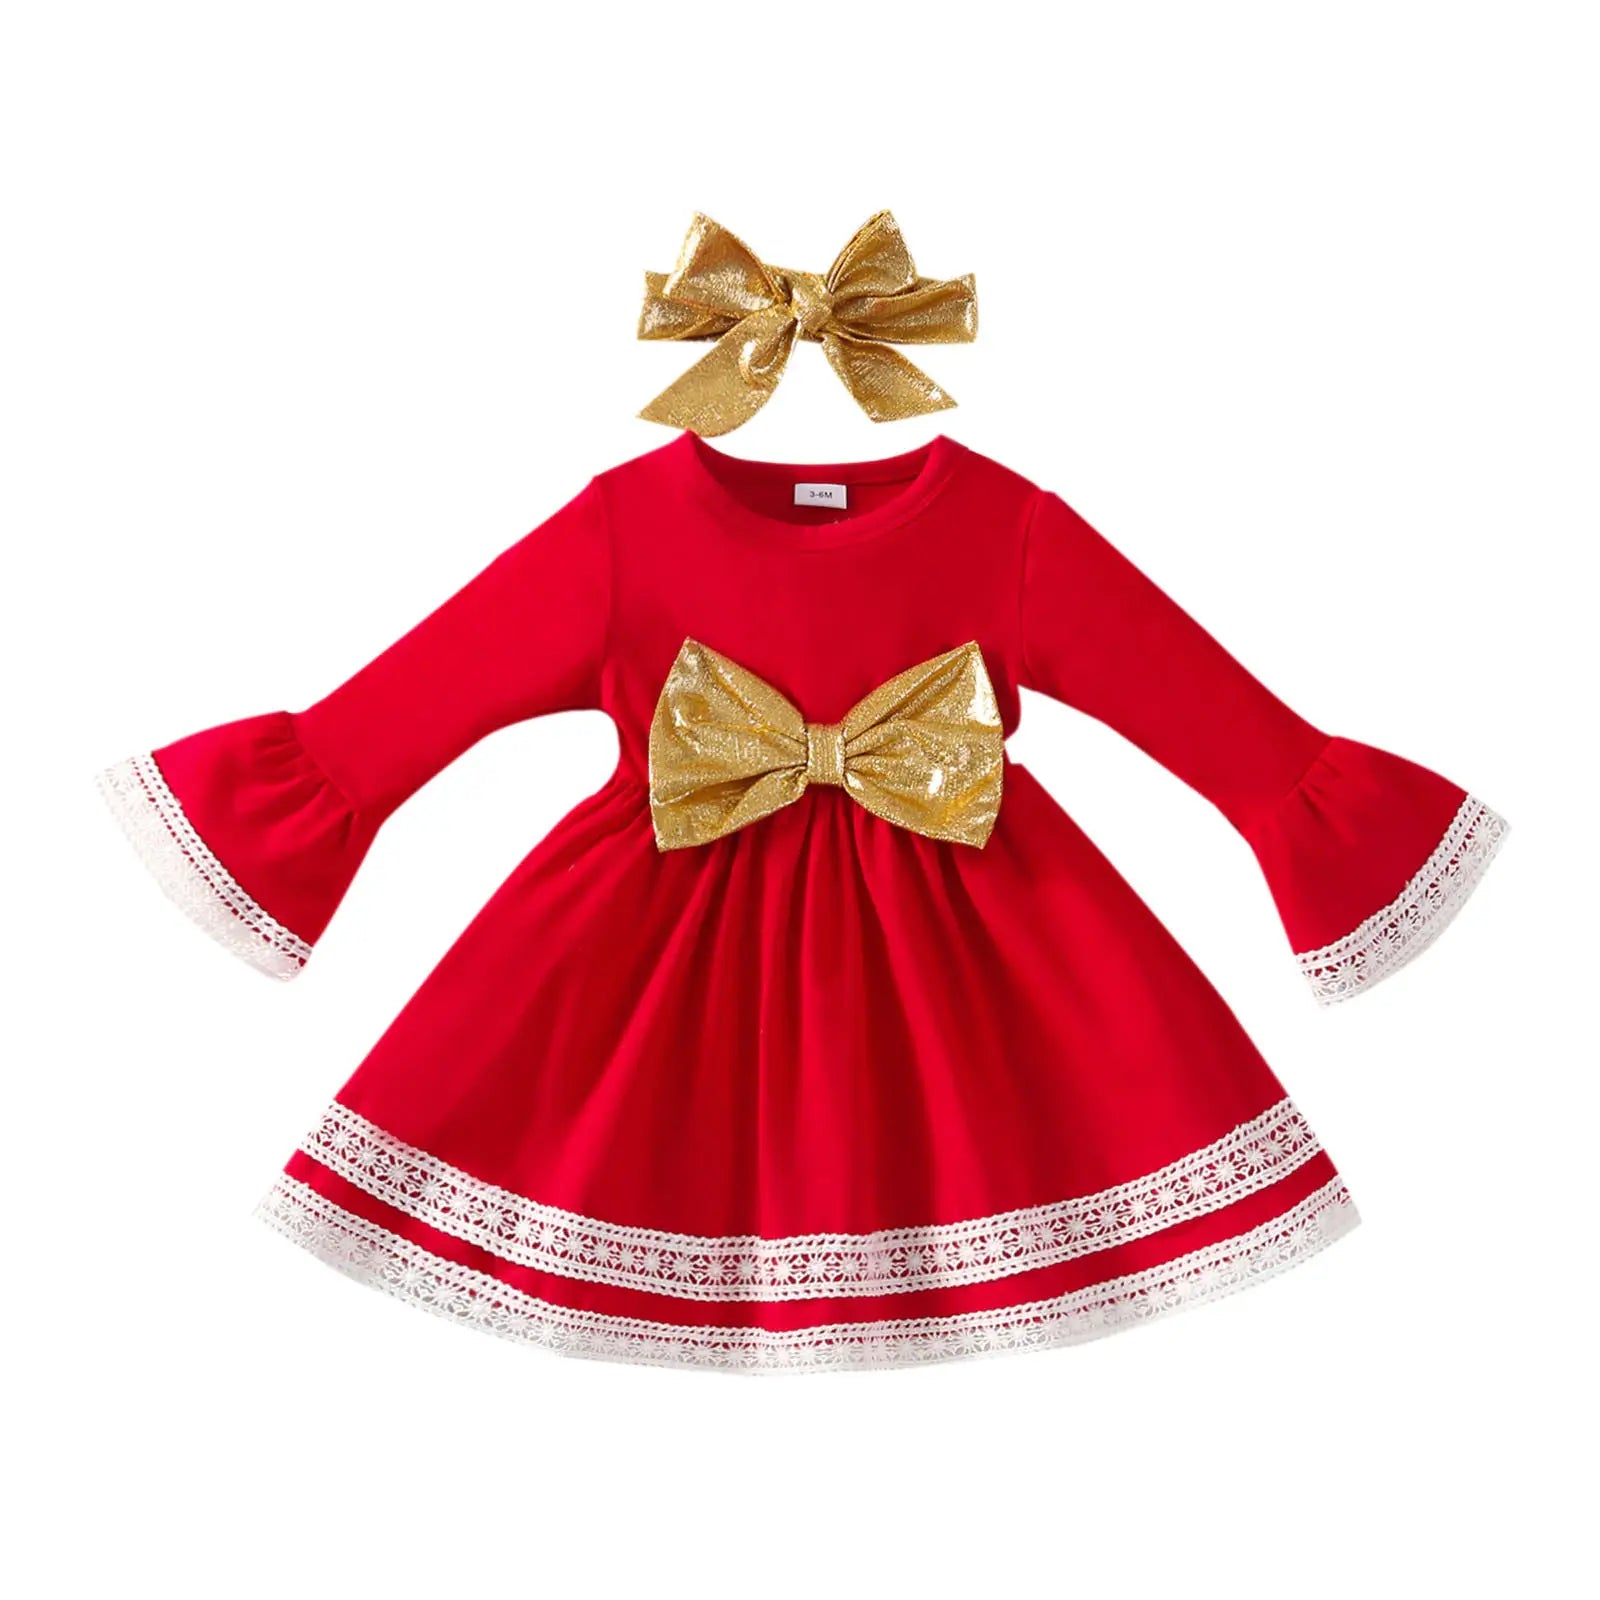 Red Christmas Dress For Baby Girls With Golden Bowknot And Headband